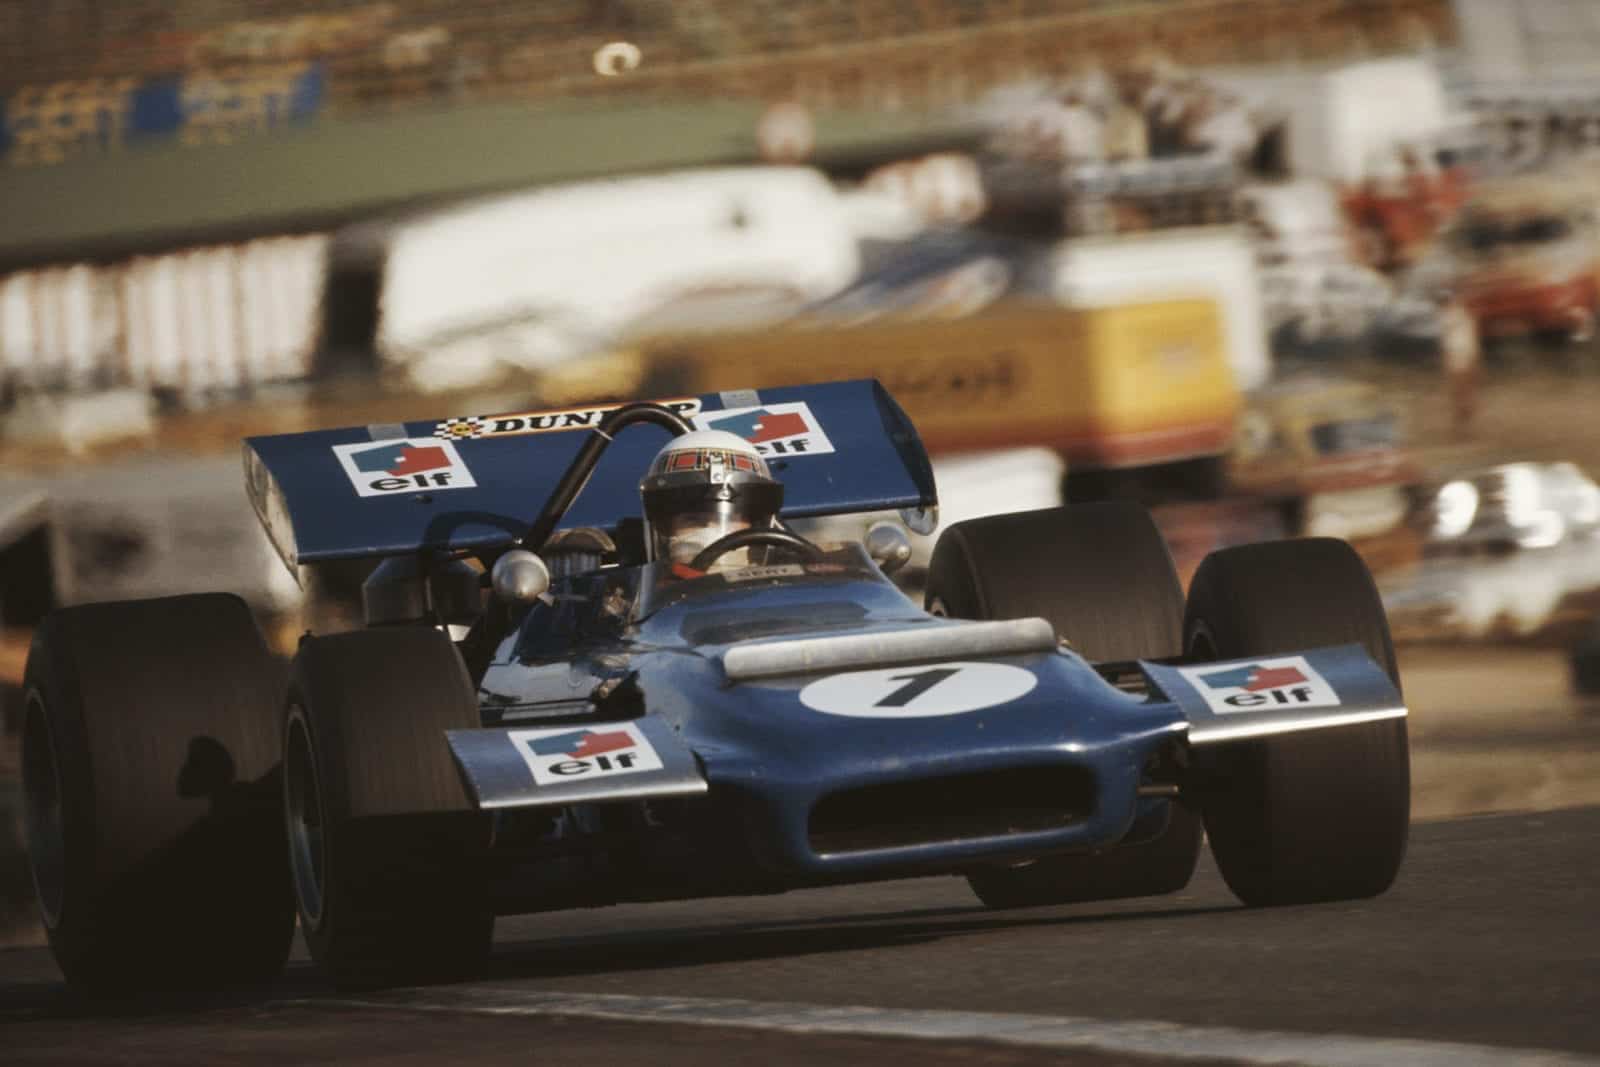 Jackie Stewart in his Tyrrell at the 1970 Spanish Grand Prix